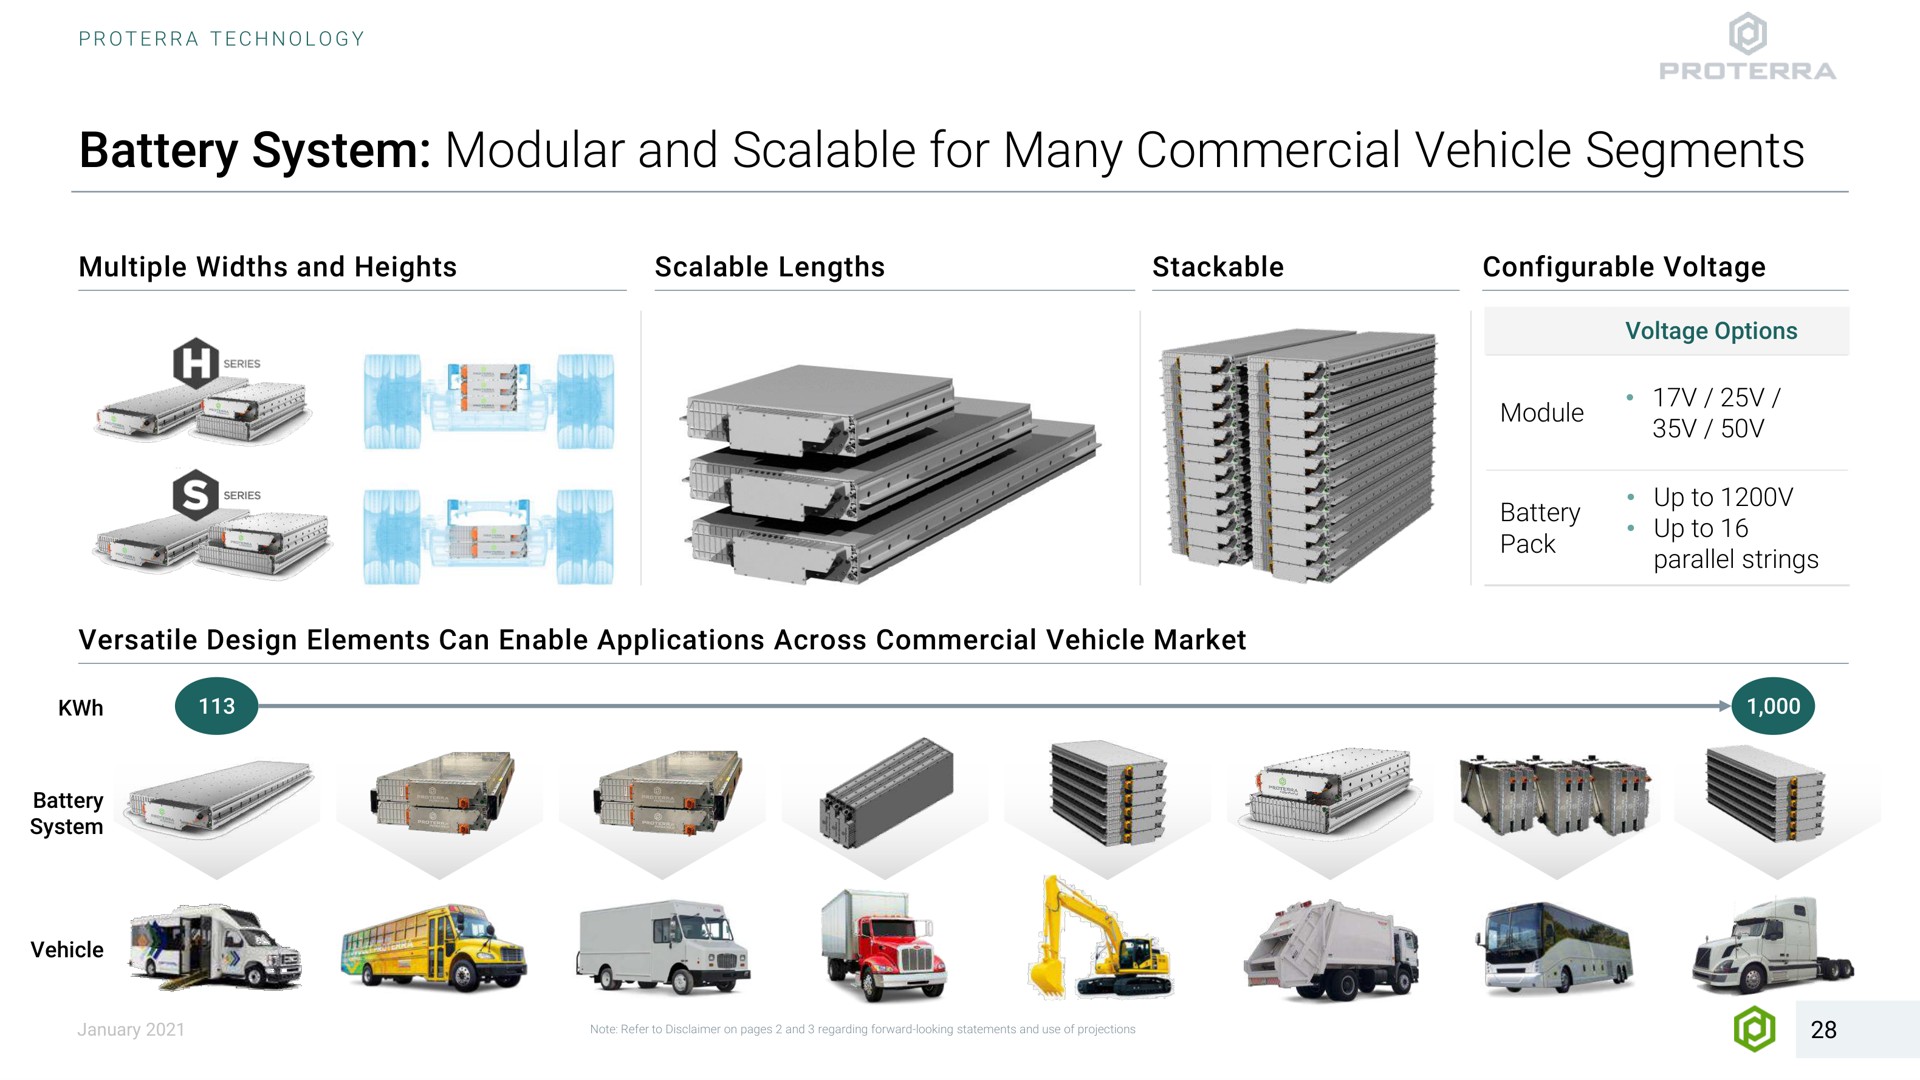 battery system modular and scalable for many commercial vehicle segments multiple widths heights lengths voltage in a i a voltage options module to up up to pack a parallel strings | Proterra